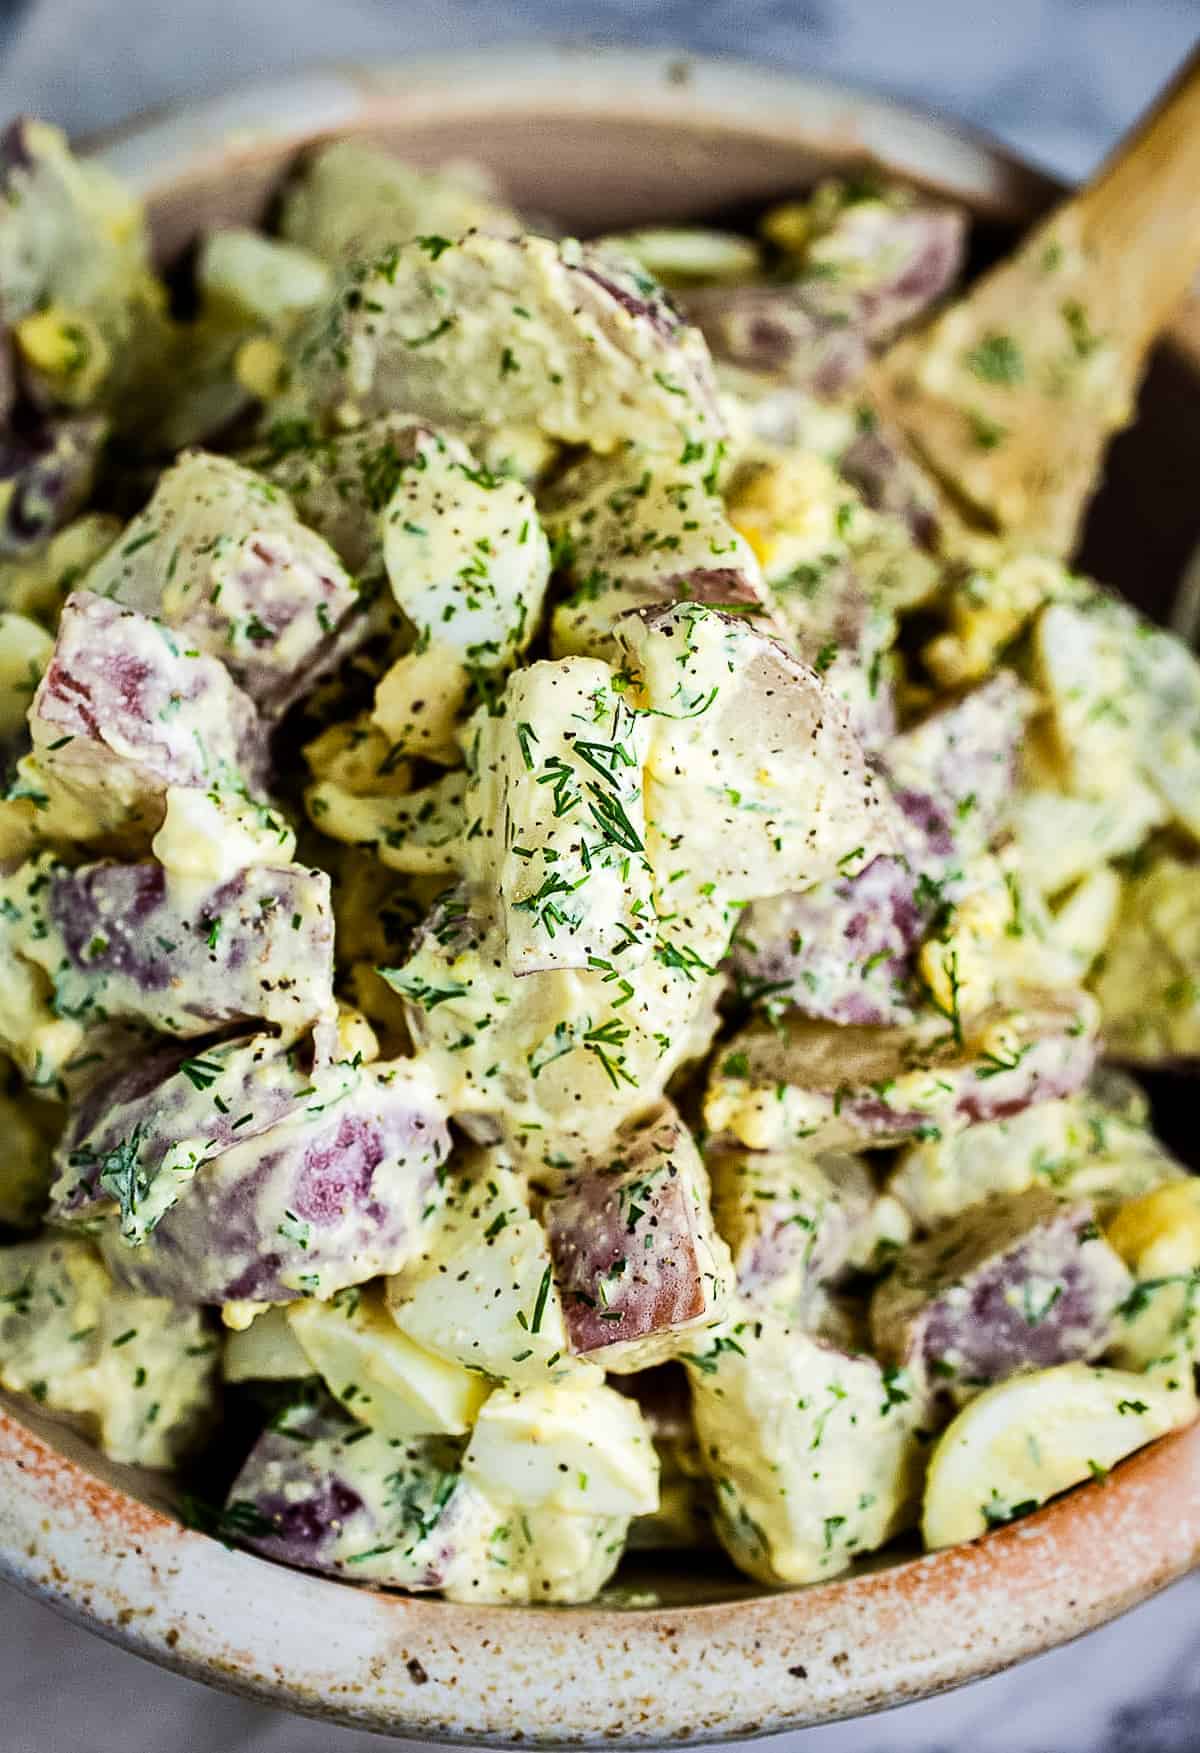 Bowl of Dill Potato Salad with wooden spoon in it